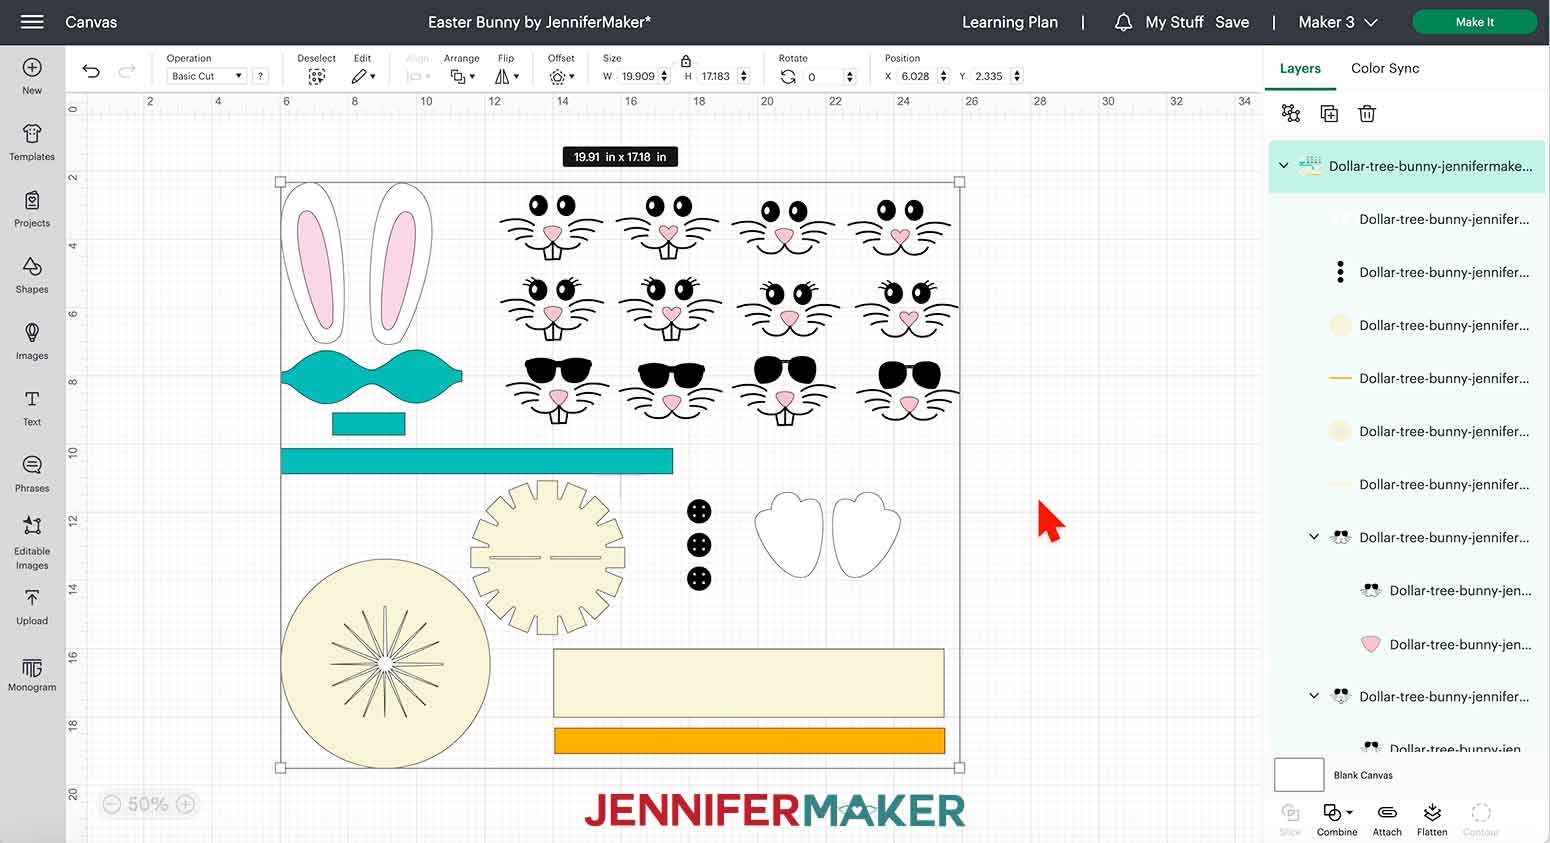 Dollar Tree Bunny SVG file uploaded to Cricut Design Space canvas.